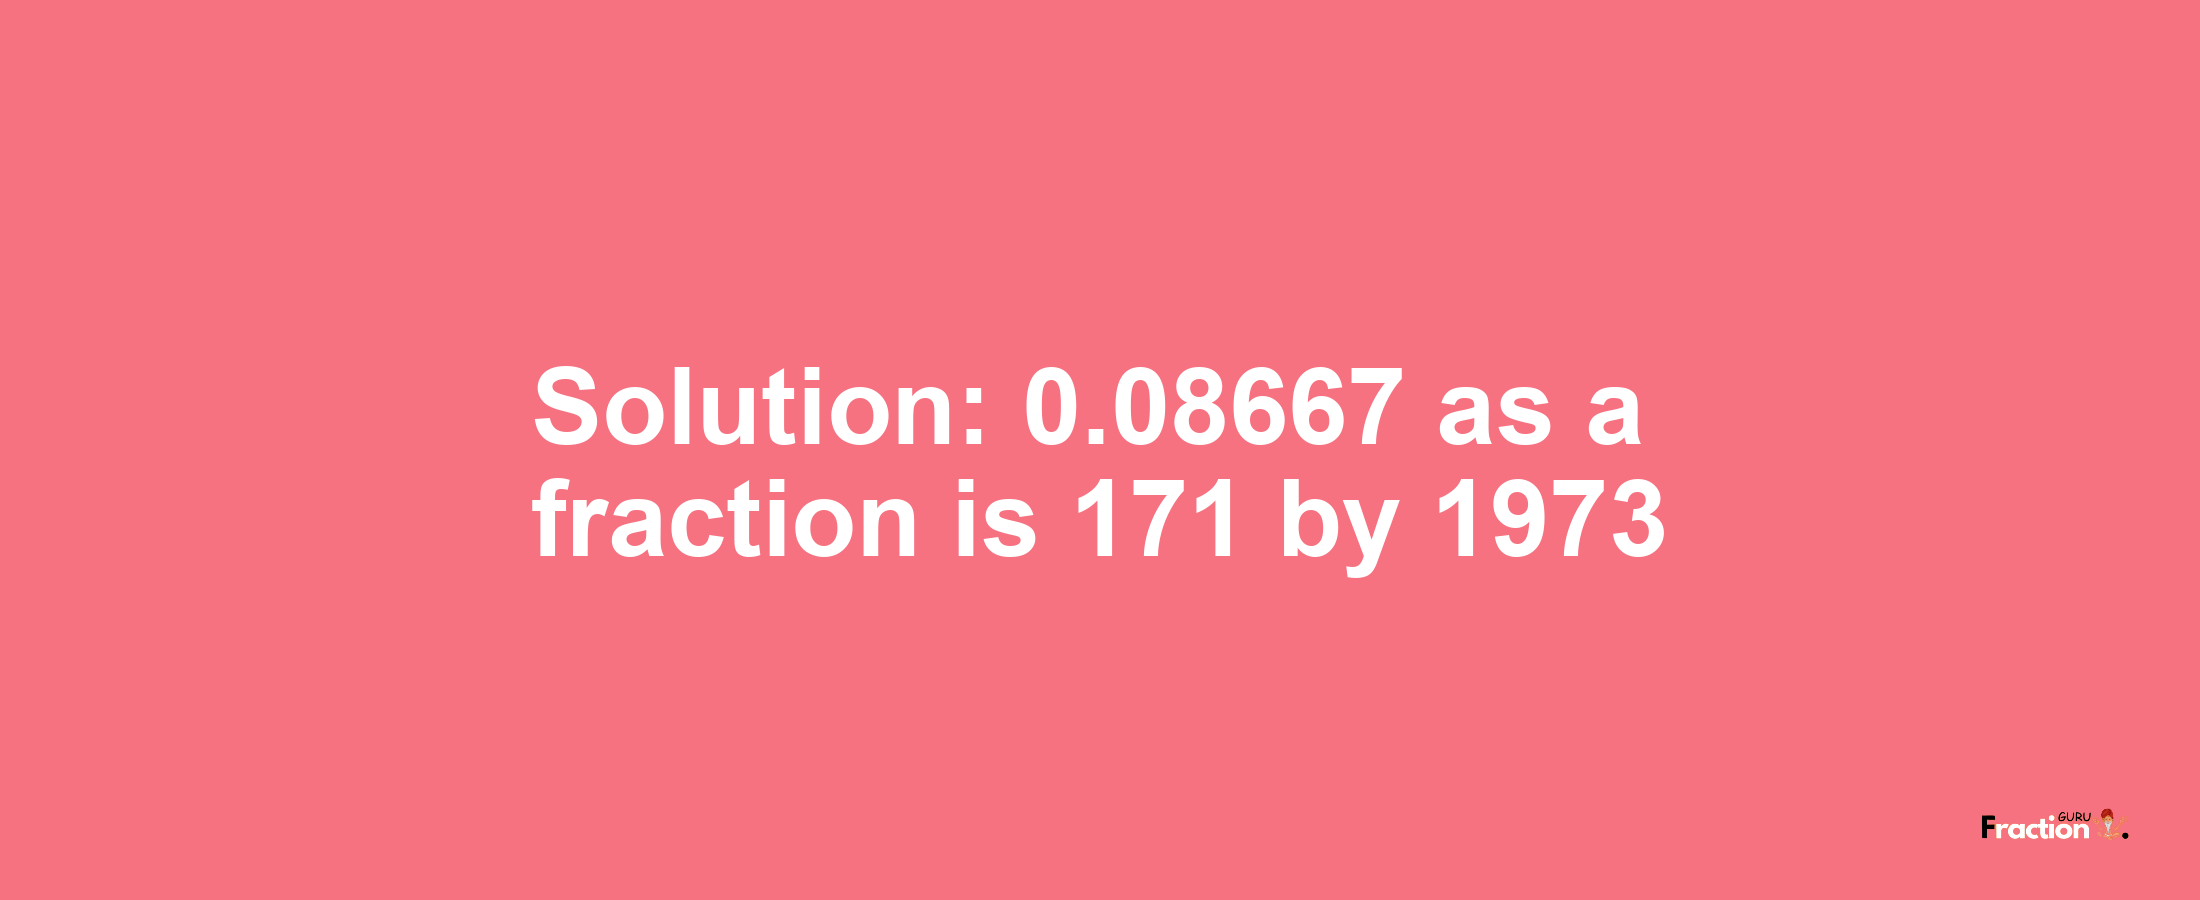 Solution:0.08667 as a fraction is 171/1973